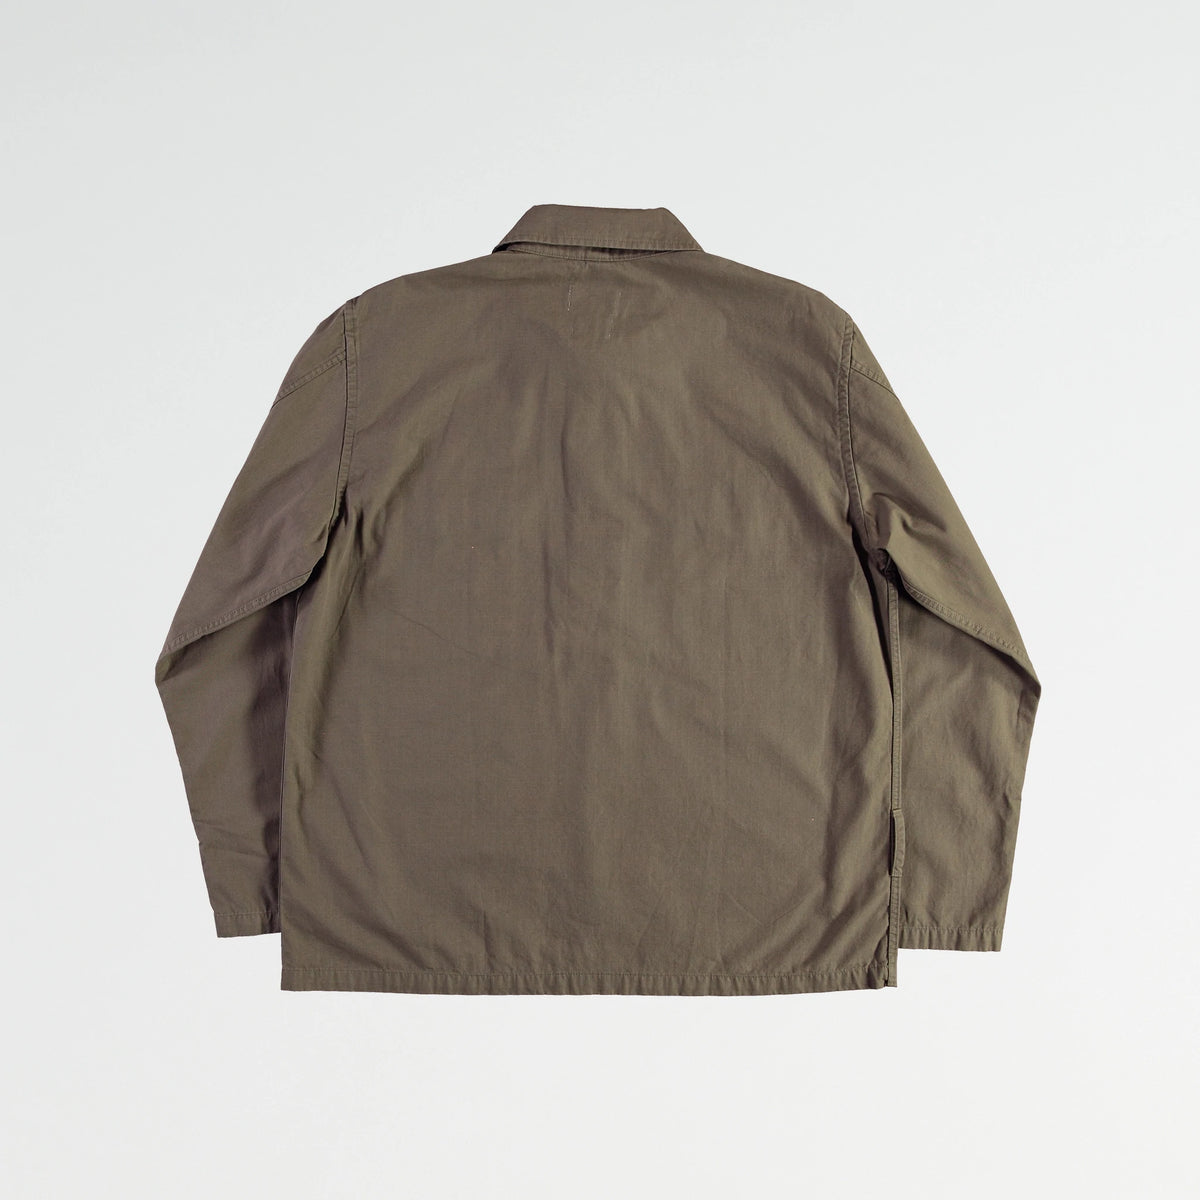  Dust Clothing Ripstop Fisherman Shirt - Forest Green 